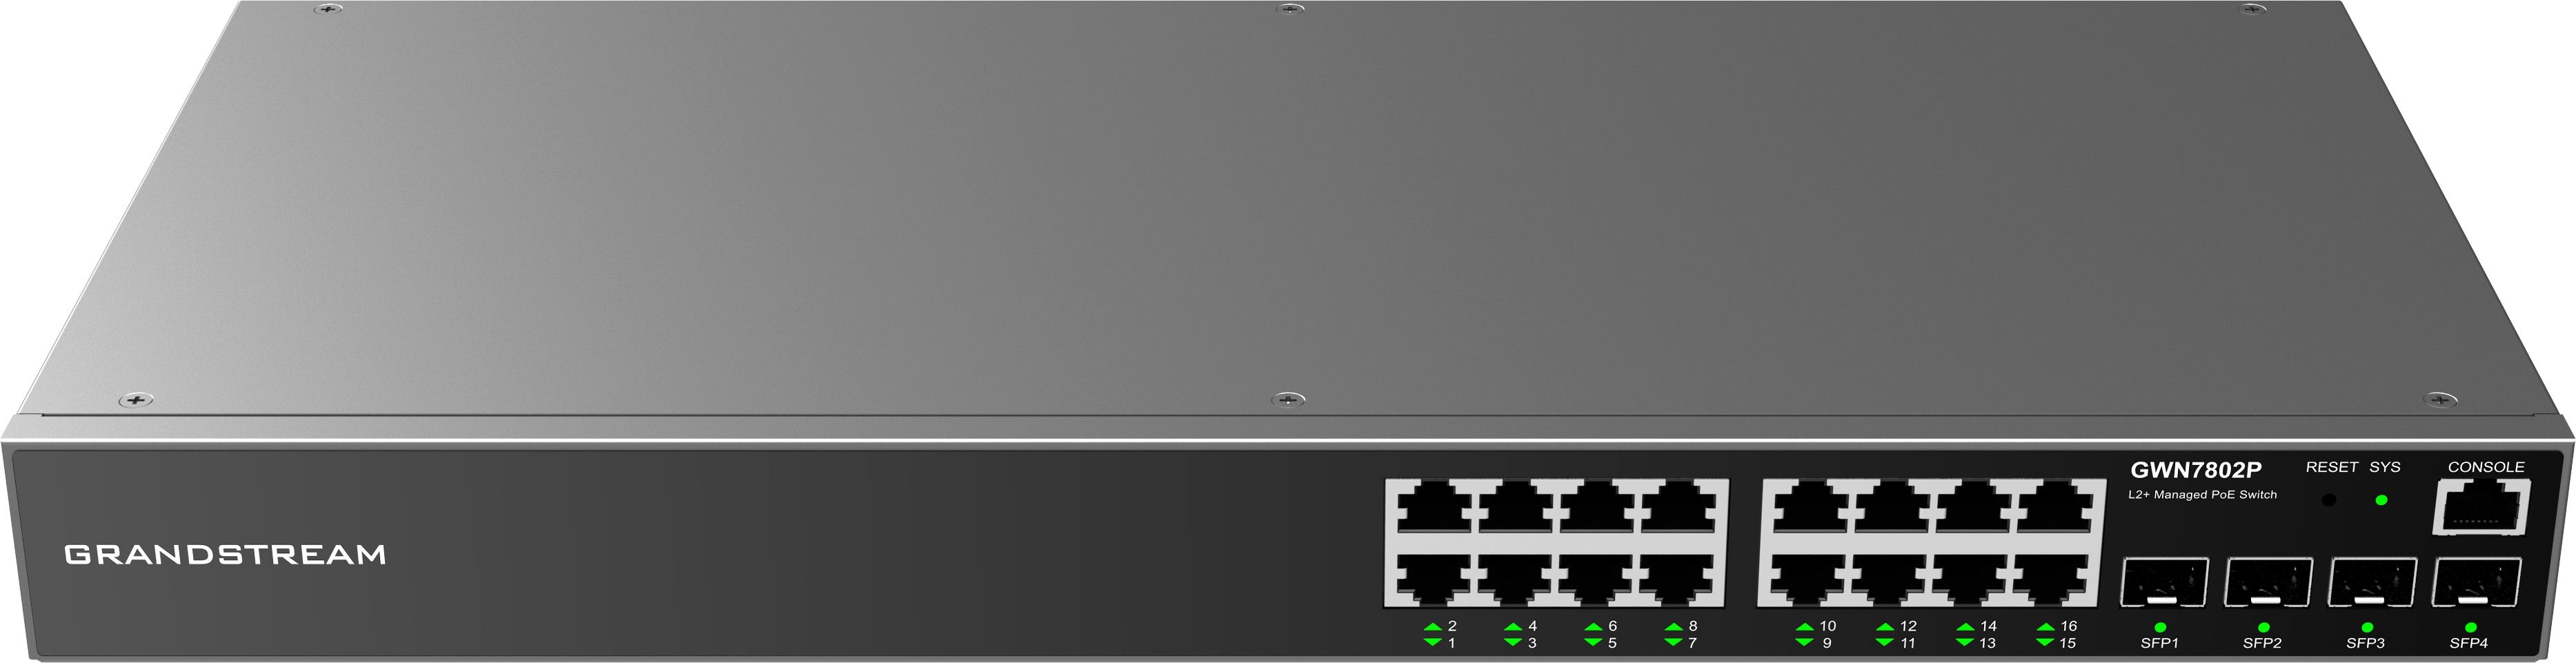 Grandstream GWN7802 Enterprise Layer 2+ Managed Network Switch (Networking Equipment Switches Gigabit Switches) photo